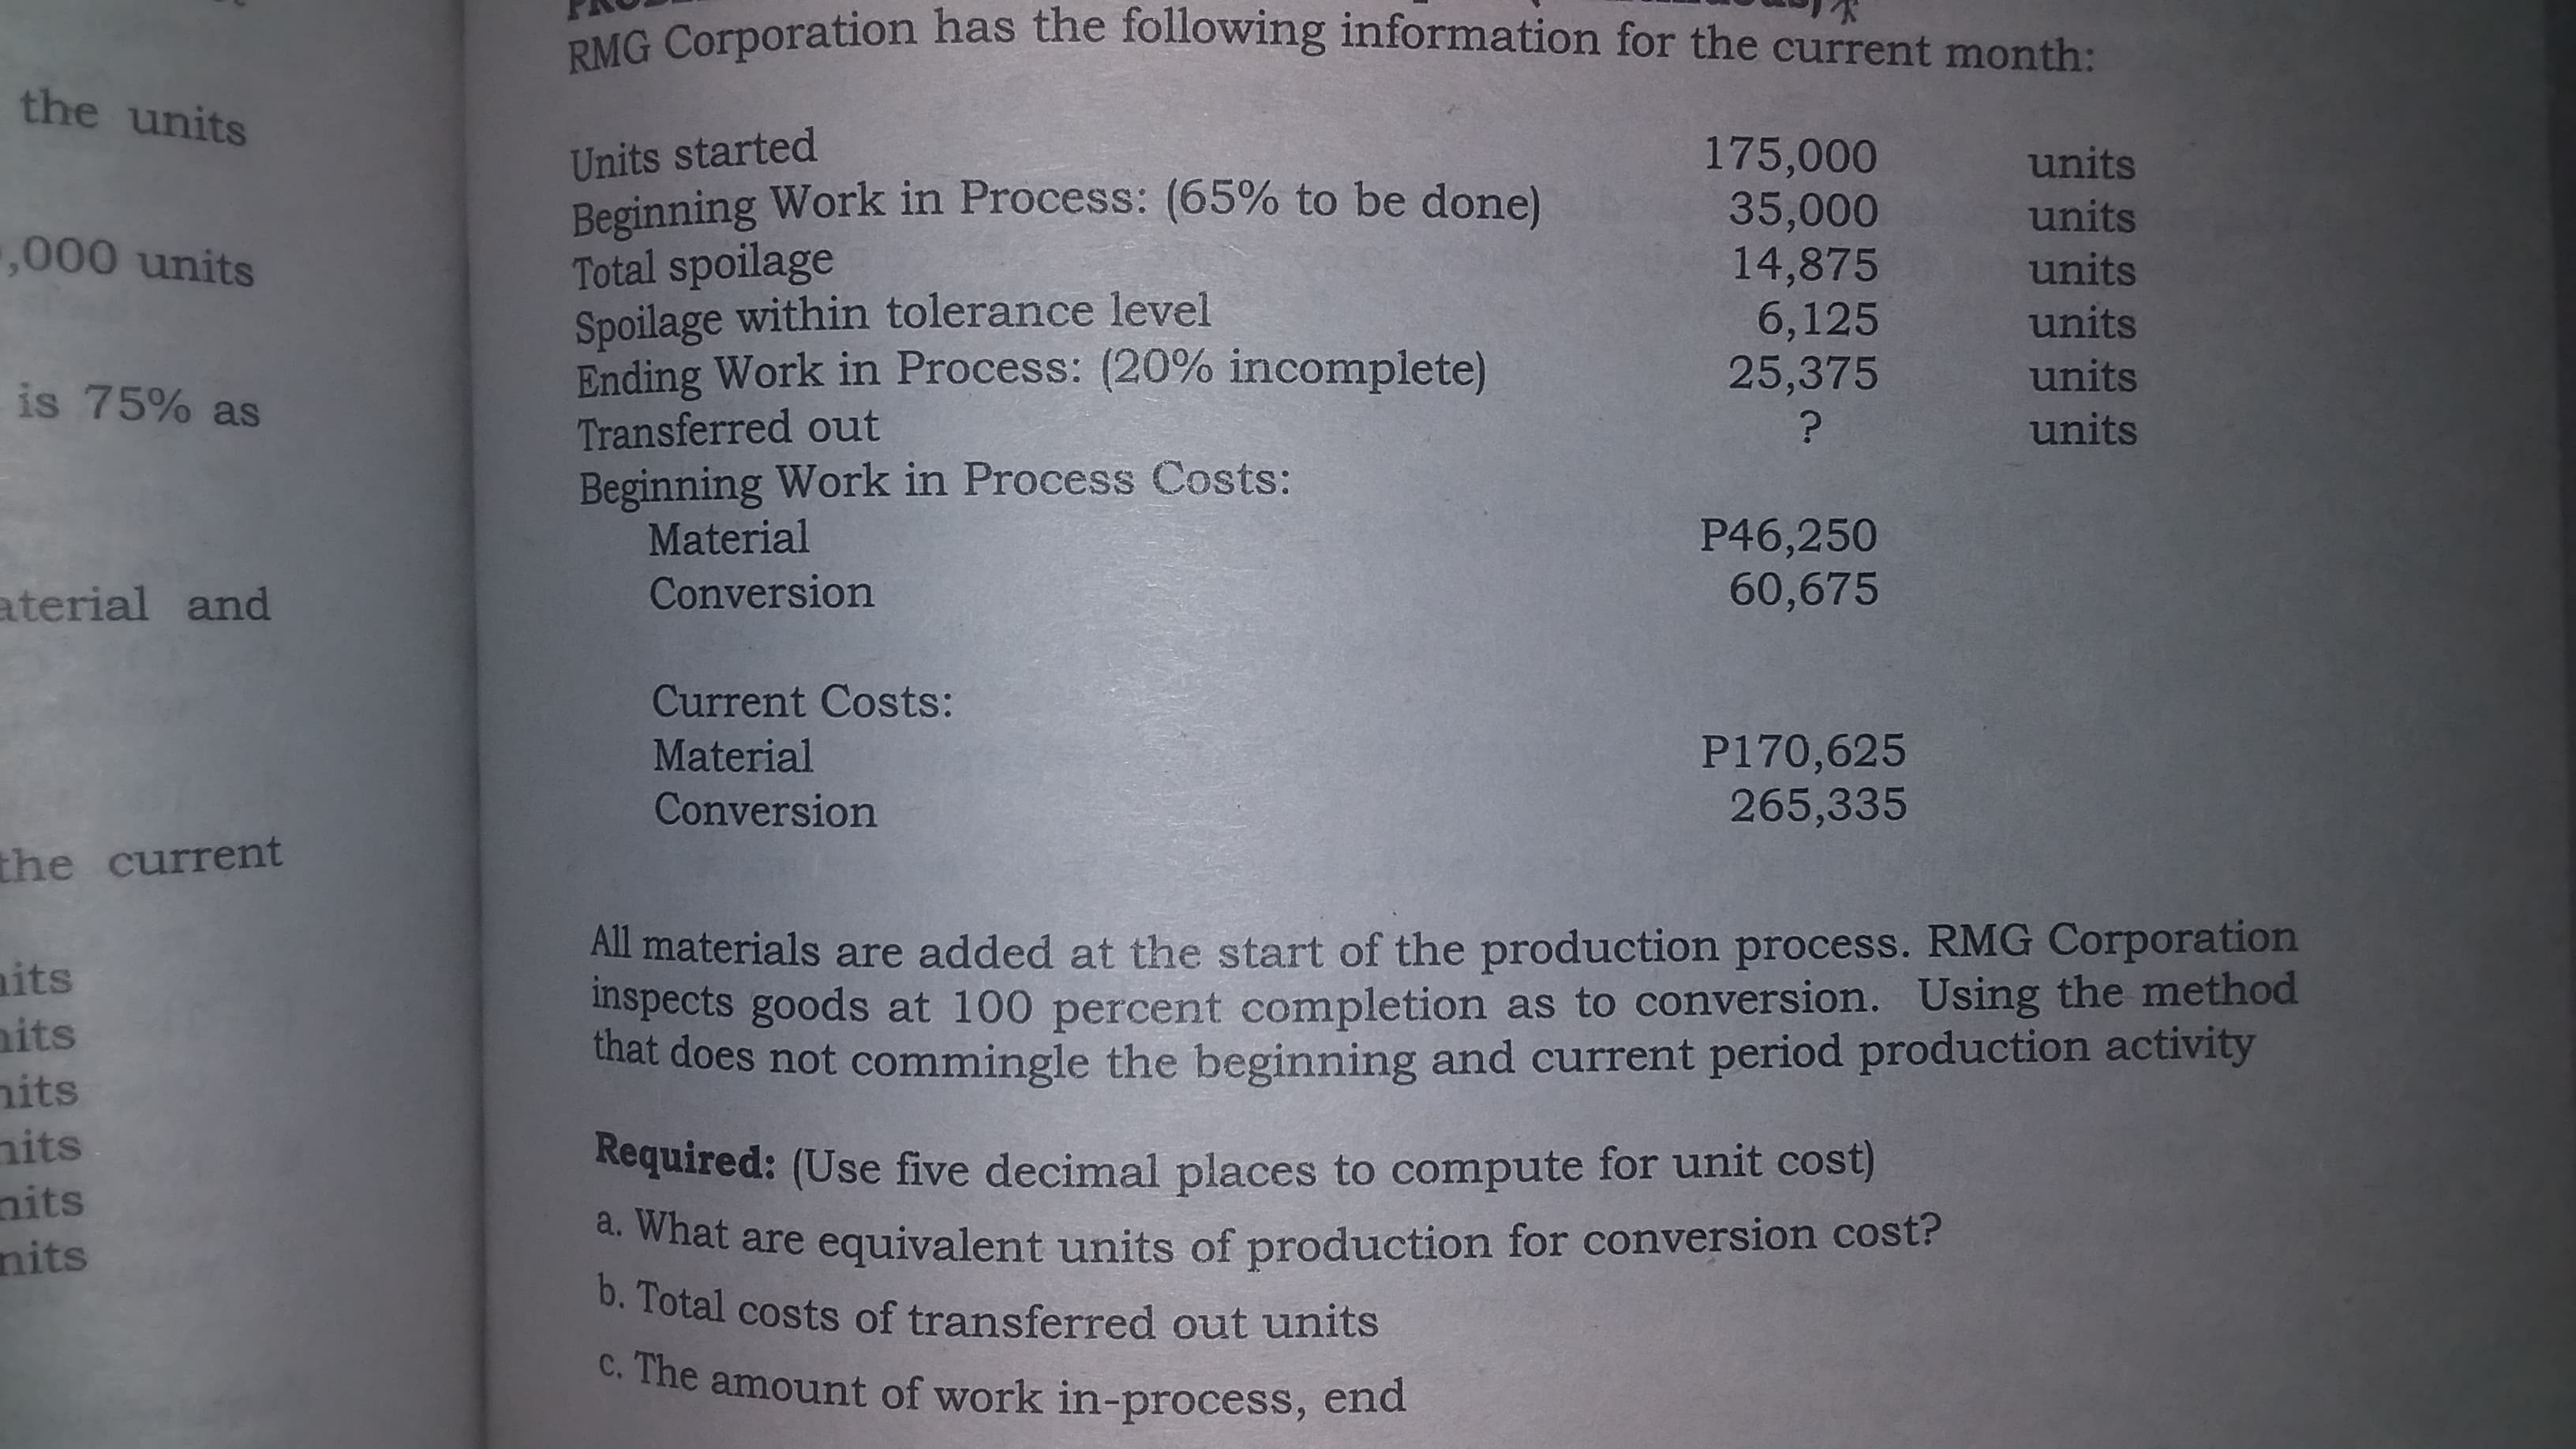 Required: (Use five decimal places to compute for unit cost)
. What are equivalent units of production for conversion cost?
0. Total costs of transferred out units
C. The amount of work in-process, end
